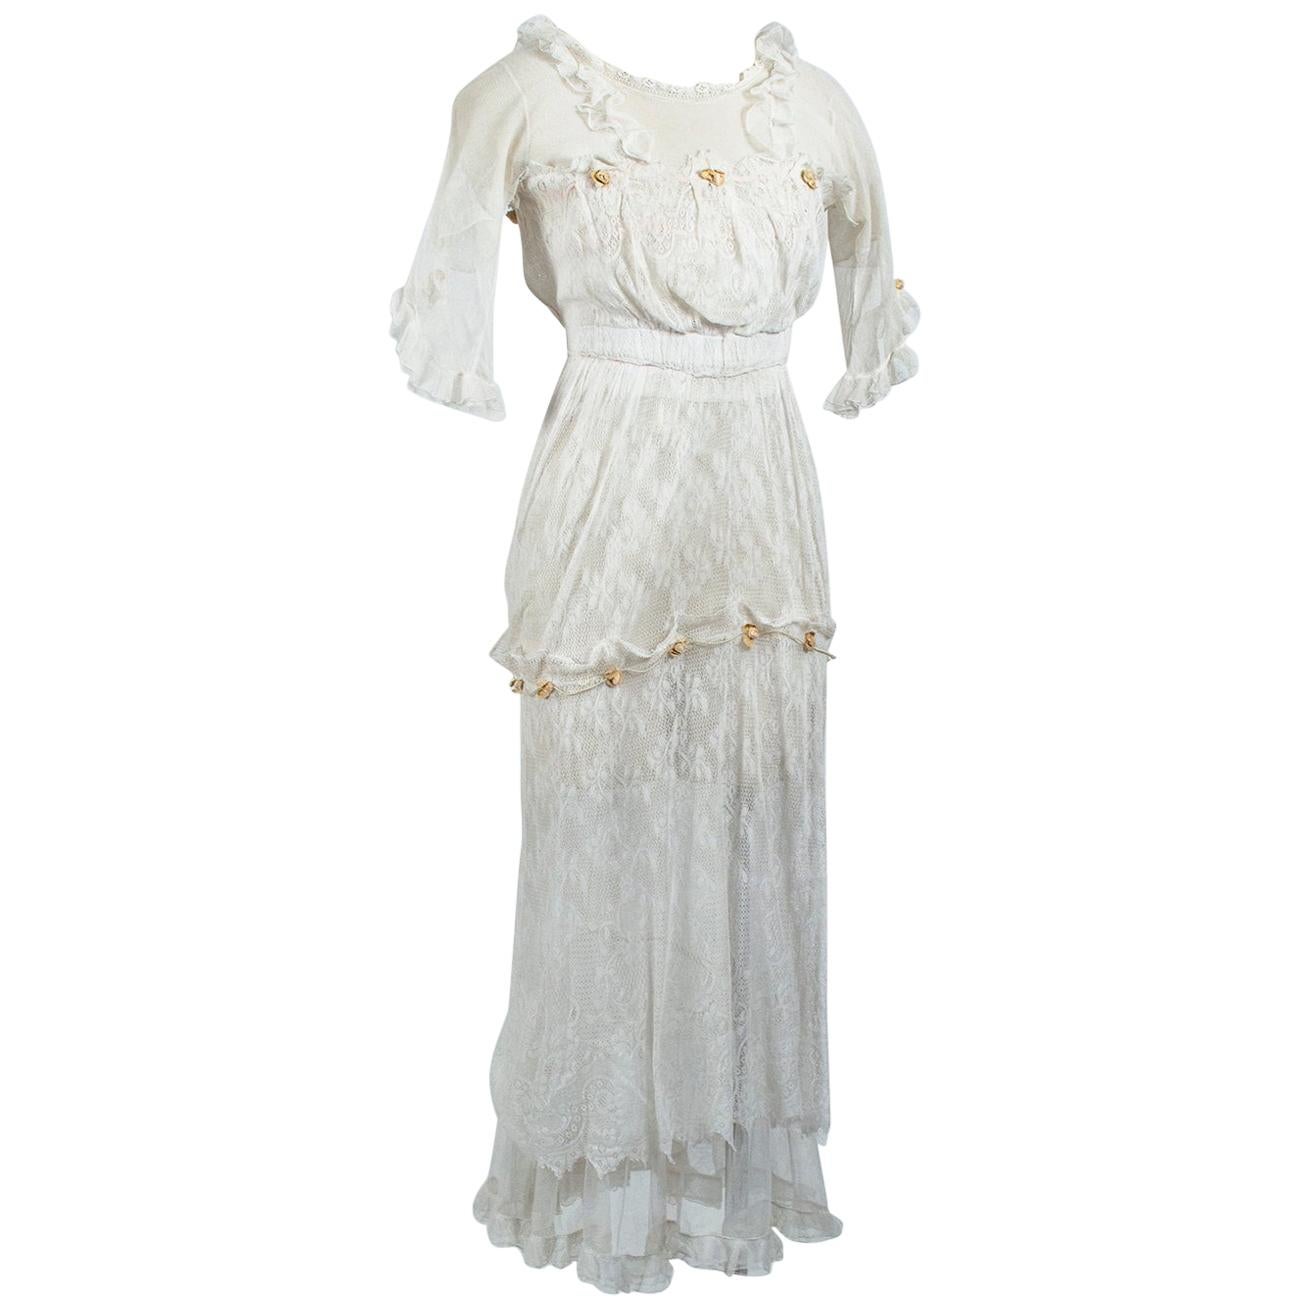 White Edwardian Net Rosebud Afternoon Tea or Bridal Gown - XXS, Early 1900s For Sale